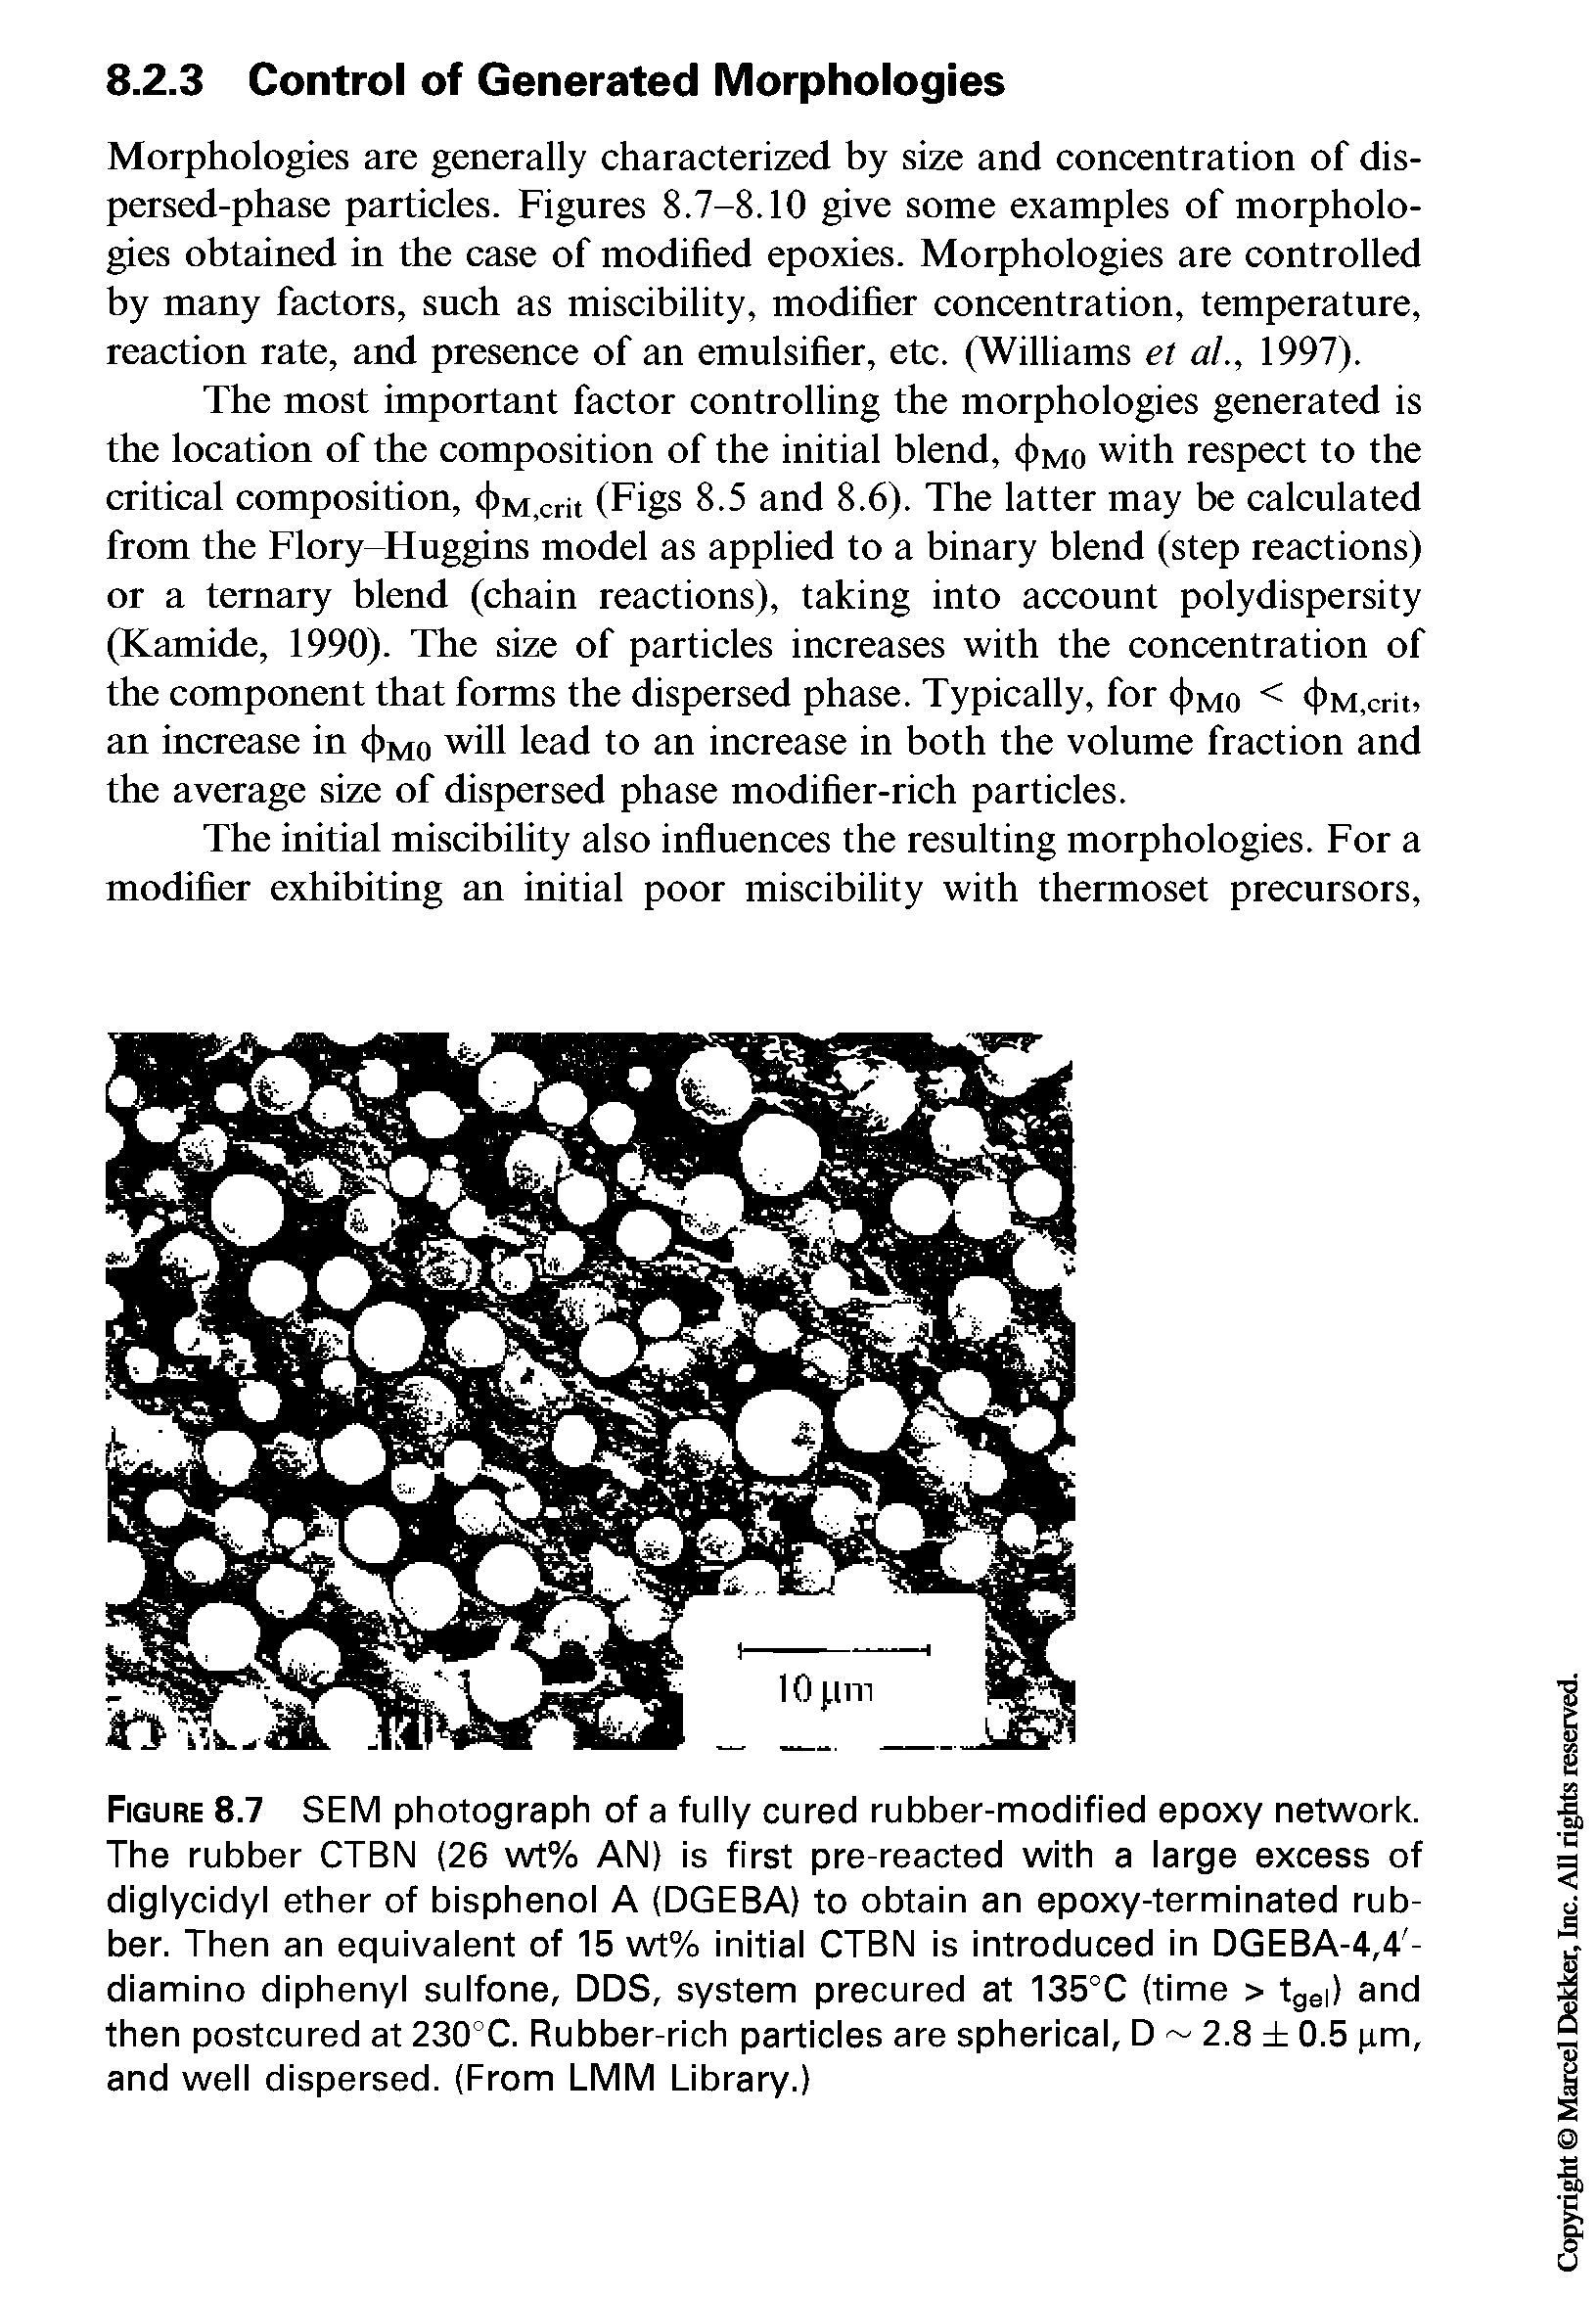 Figure 8.7 SEM photograph of a fully cured rubber-modified epoxy network. The rubber CTBN (26 wt% AN) is first pre-reacted with a large excess of diglycidyl ether of bisphenol A (DGEBA) to obtain an epoxy-terminated rubber. Then an equivalent of 15 wt% initial CTBN is introduced in DGEBA-4,4 -diamino diphenyl sulfone, DDS, system precured at 135°C (time > tgei) and then postcured at 230°C. Rubber-rich particles are spherical, D 2.8 0.5 gm, and well dispersed. (From LMM Library.)...